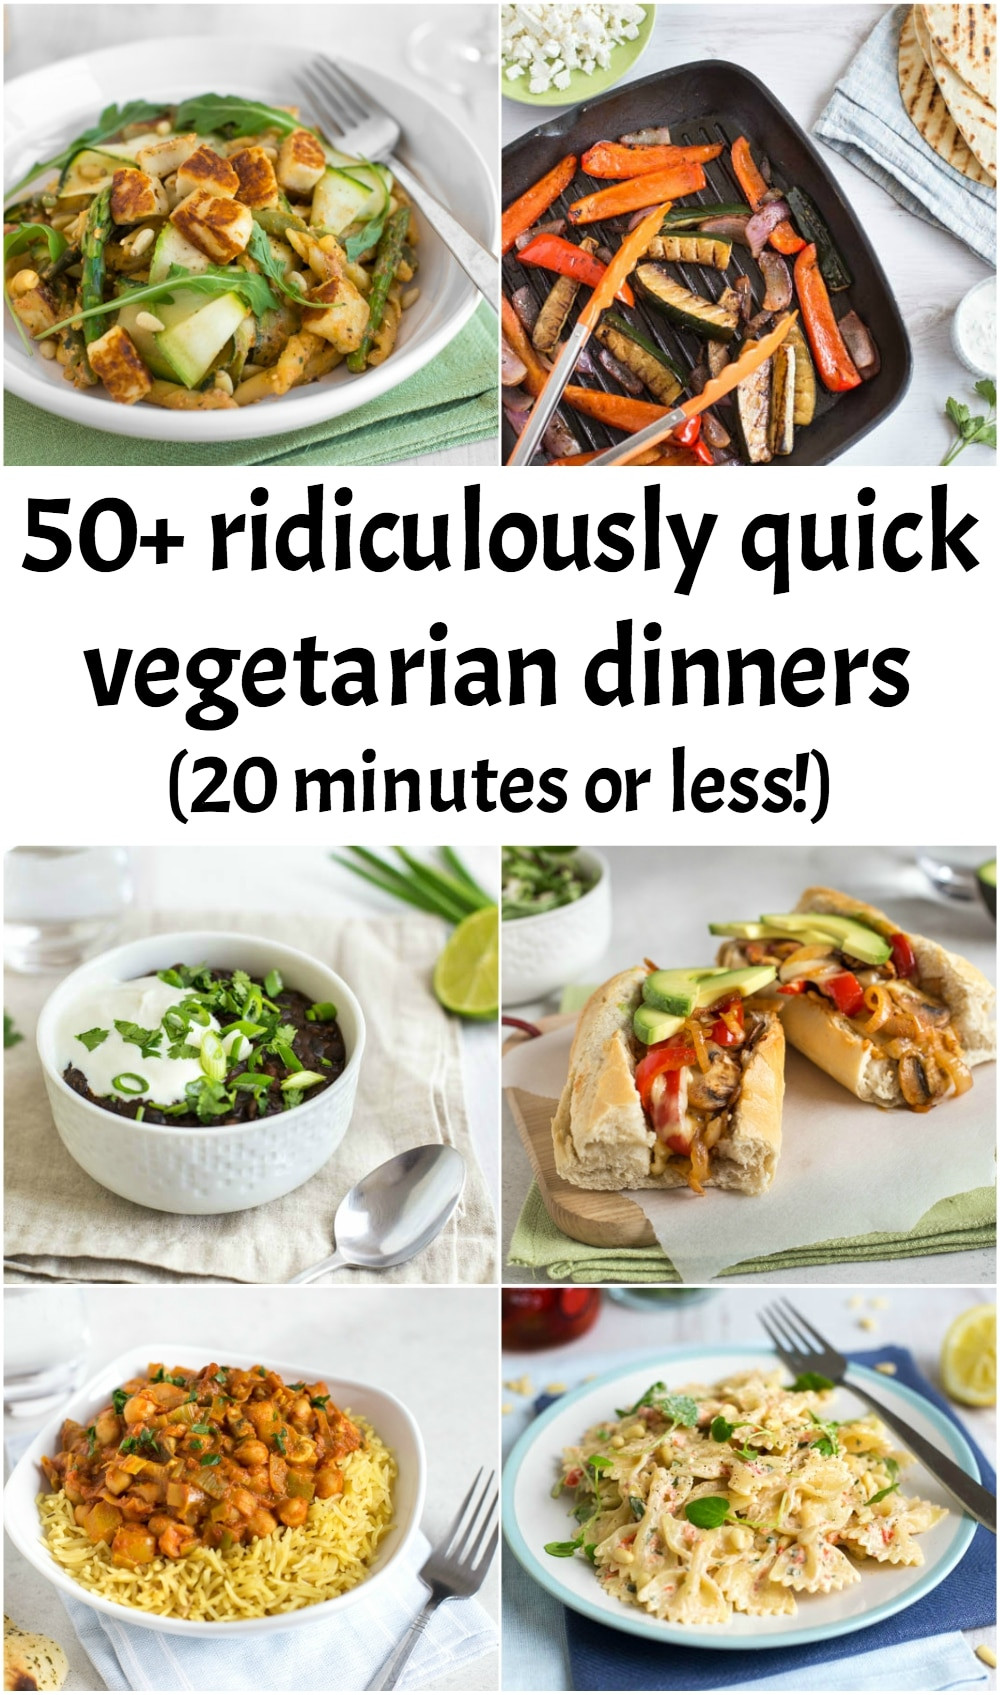 Easy Vegetarian Dinner Recipes
 50 ridiculously quick ve arian dinners 20 minutes or